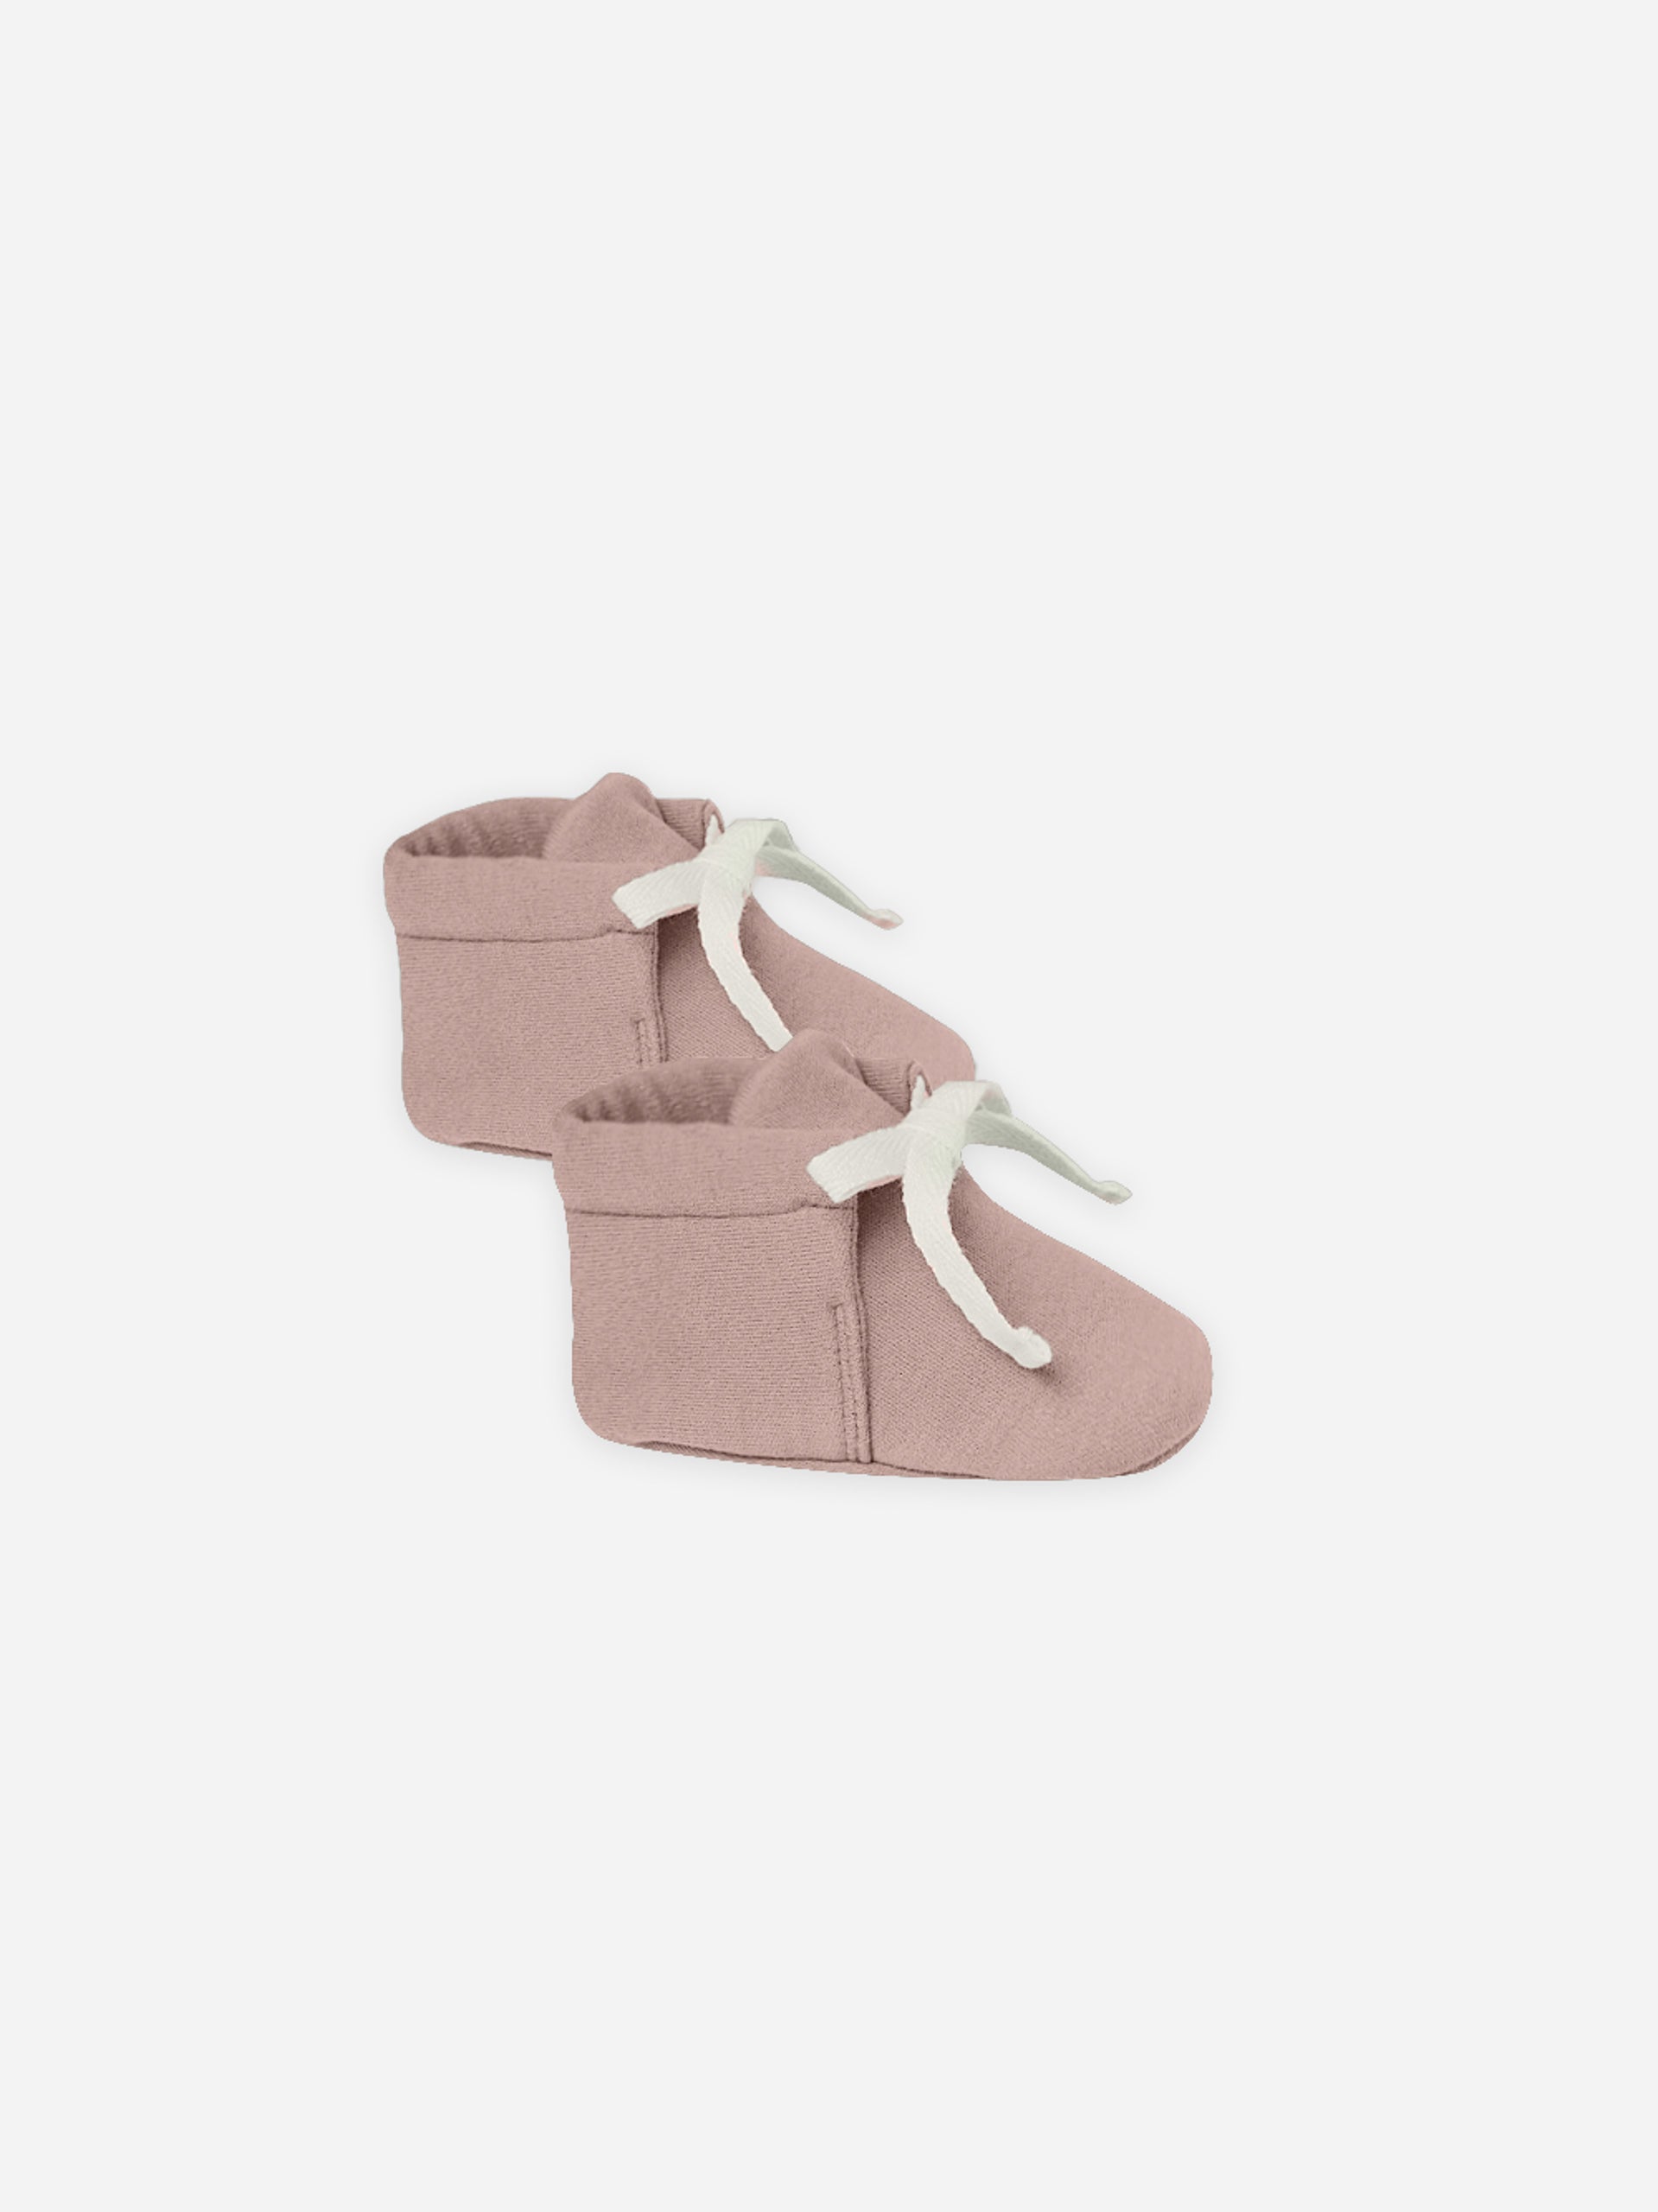 Baby Booties || Mauve - Rylee + Cru | Kids Clothes | Trendy Baby Clothes | Modern Infant Outfits |